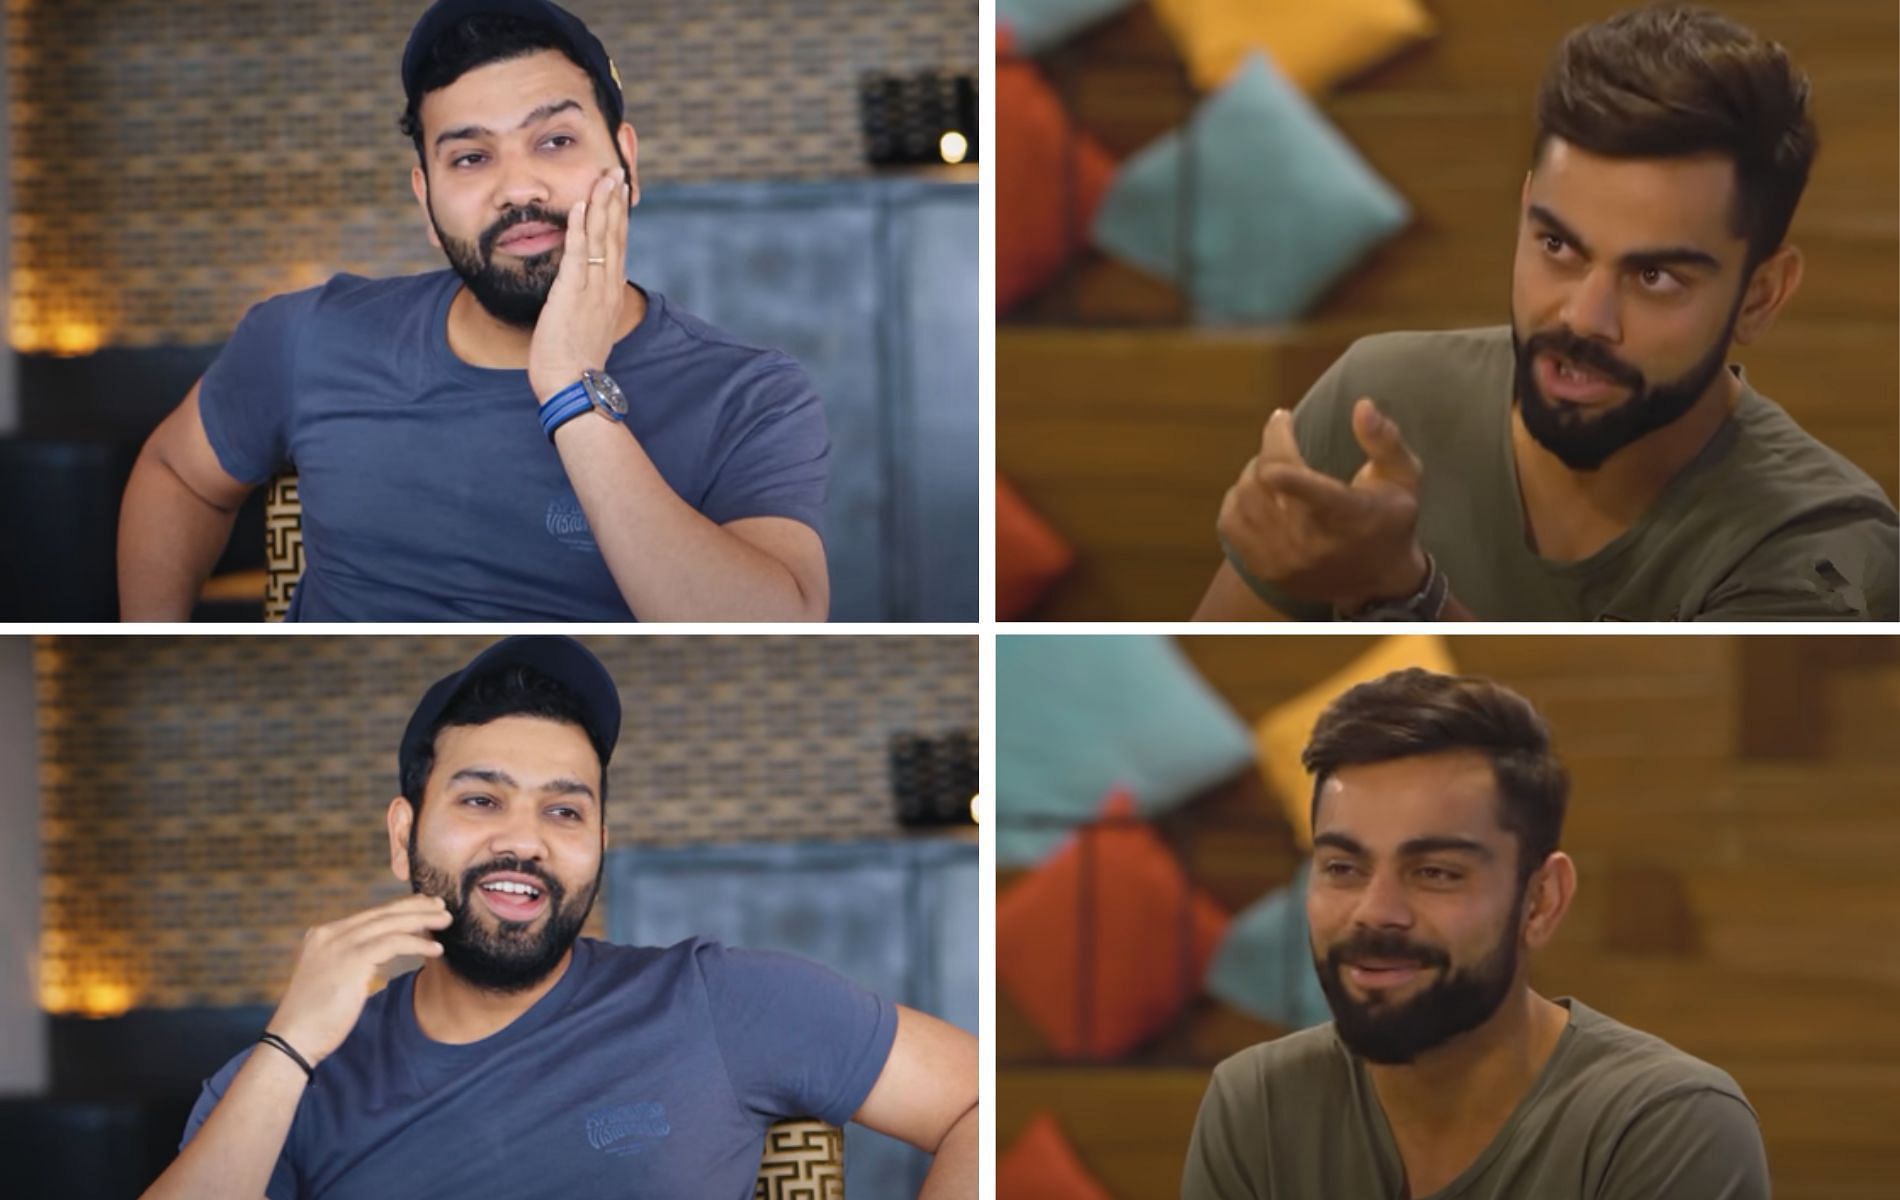 Rohit Sharma (left) and Virat Kohli are known for their cricket as well as their sense of humor. Credits: Oaktree Sports